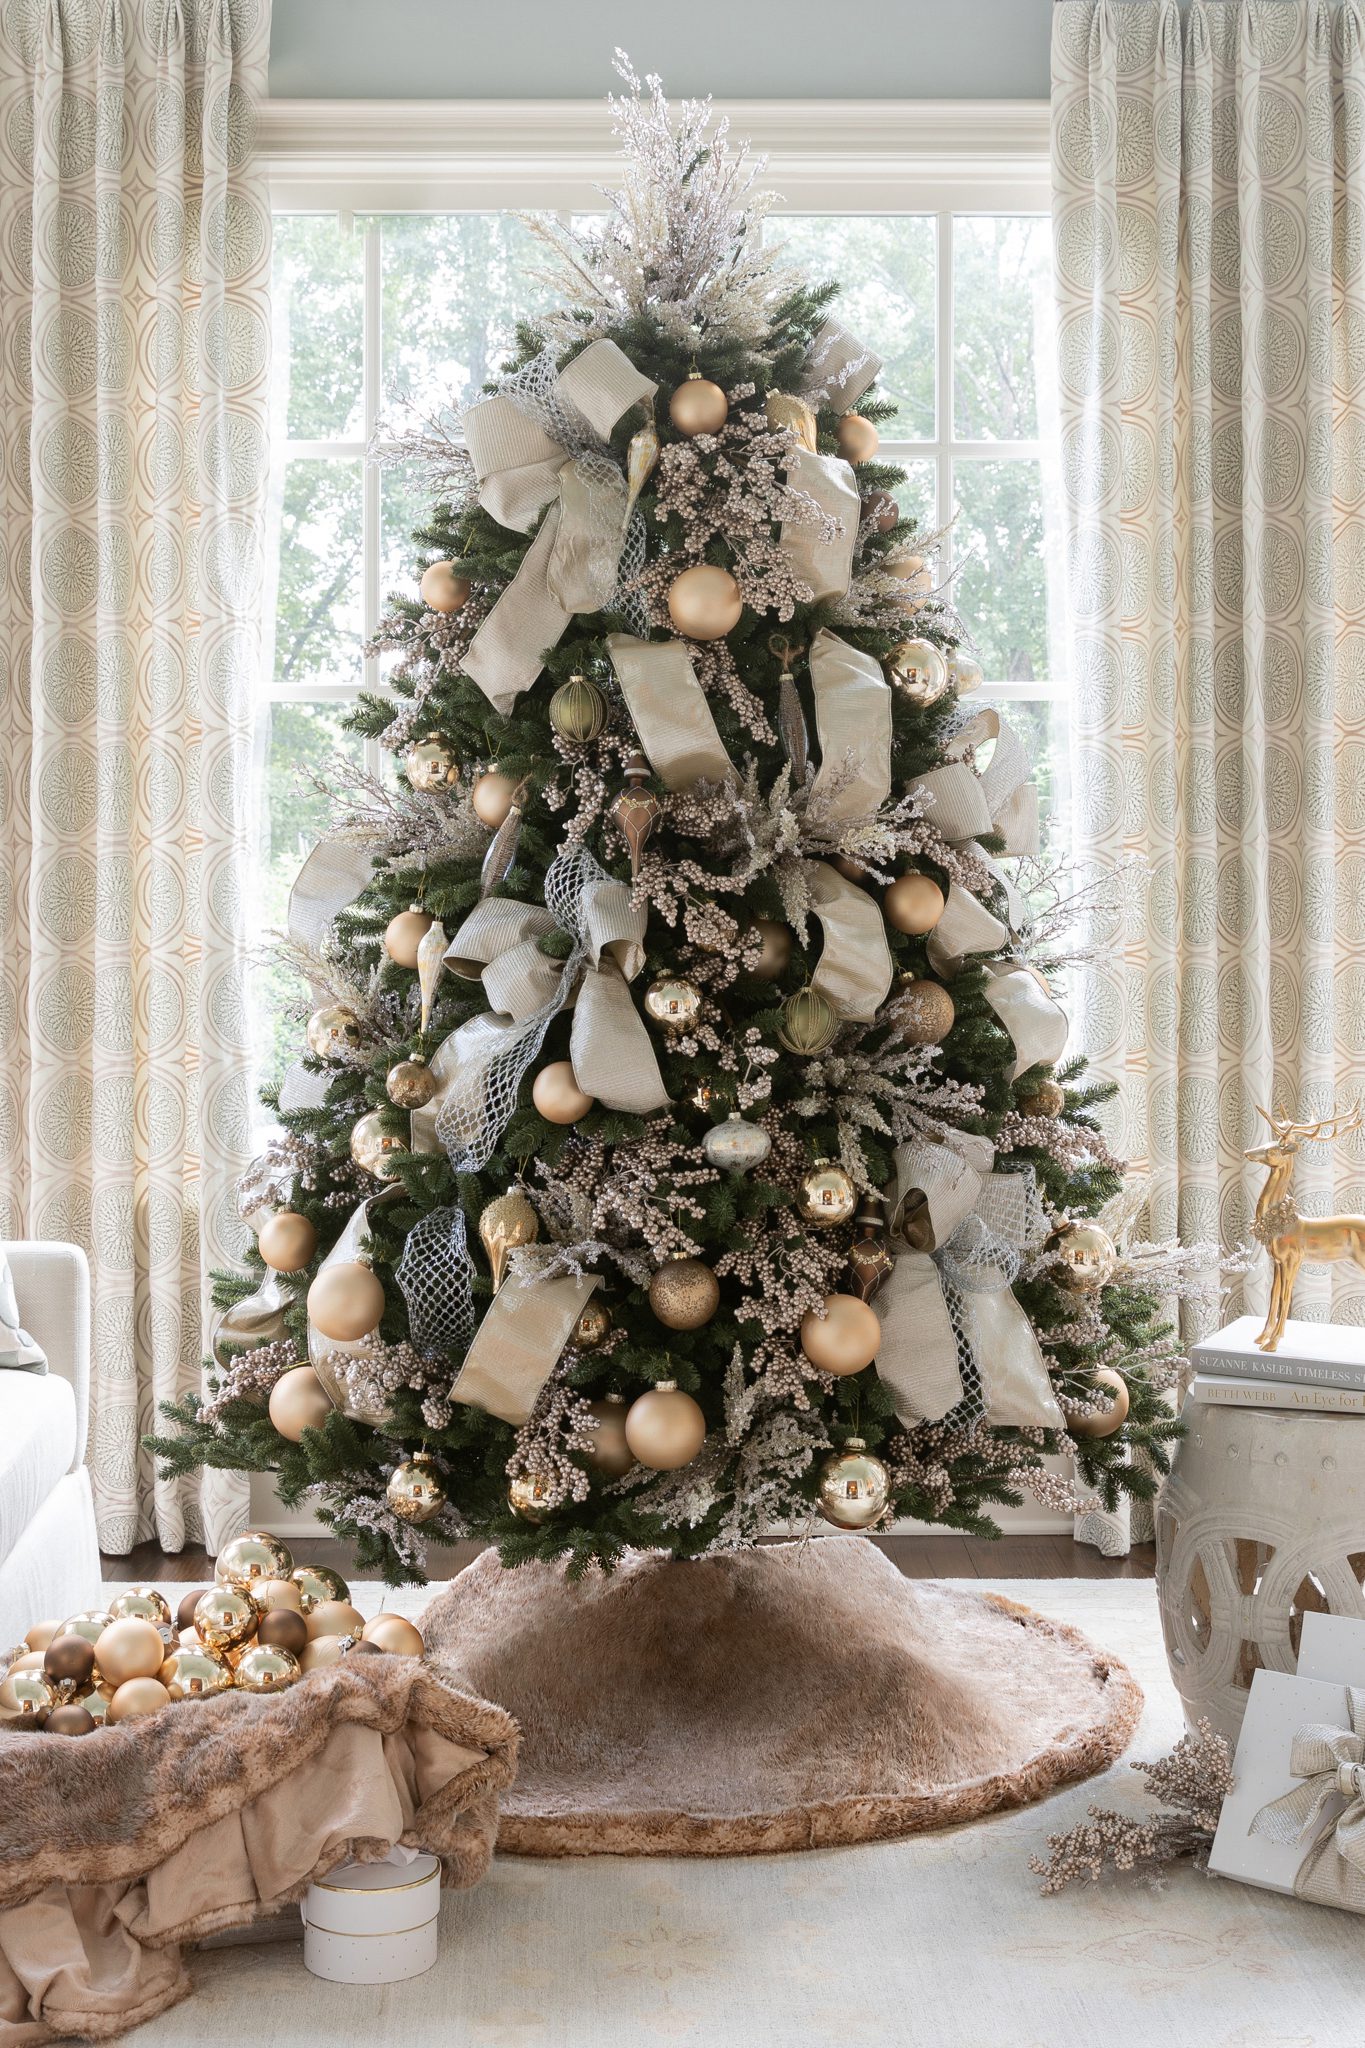 How to decorate a gold Christmas tree